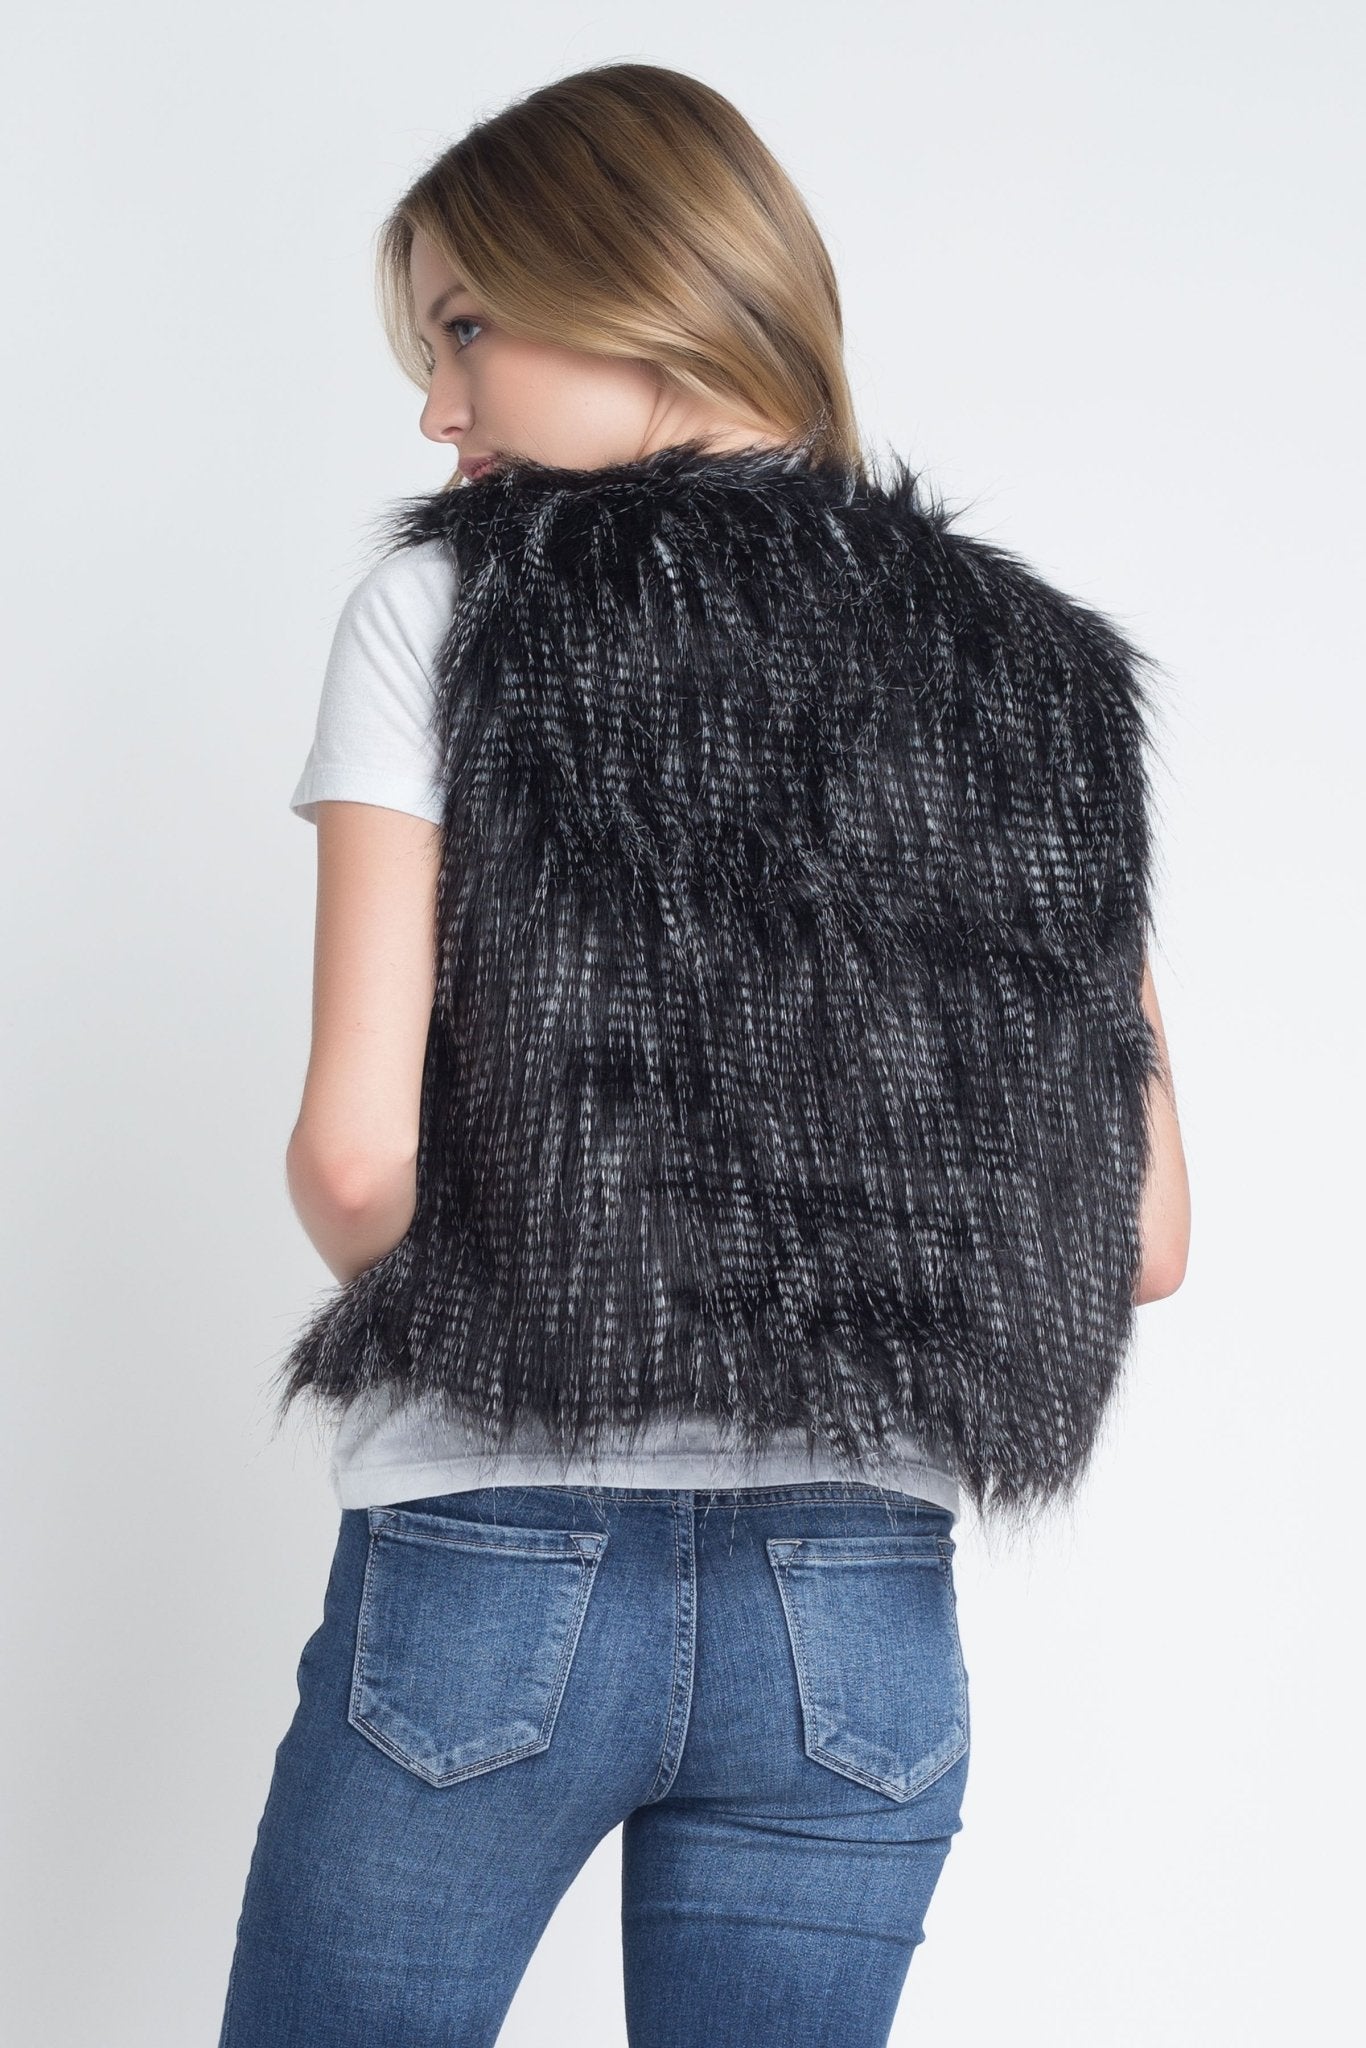 Women's Faux Fur Sleeveless Vest - BeExtra! Apparel & More